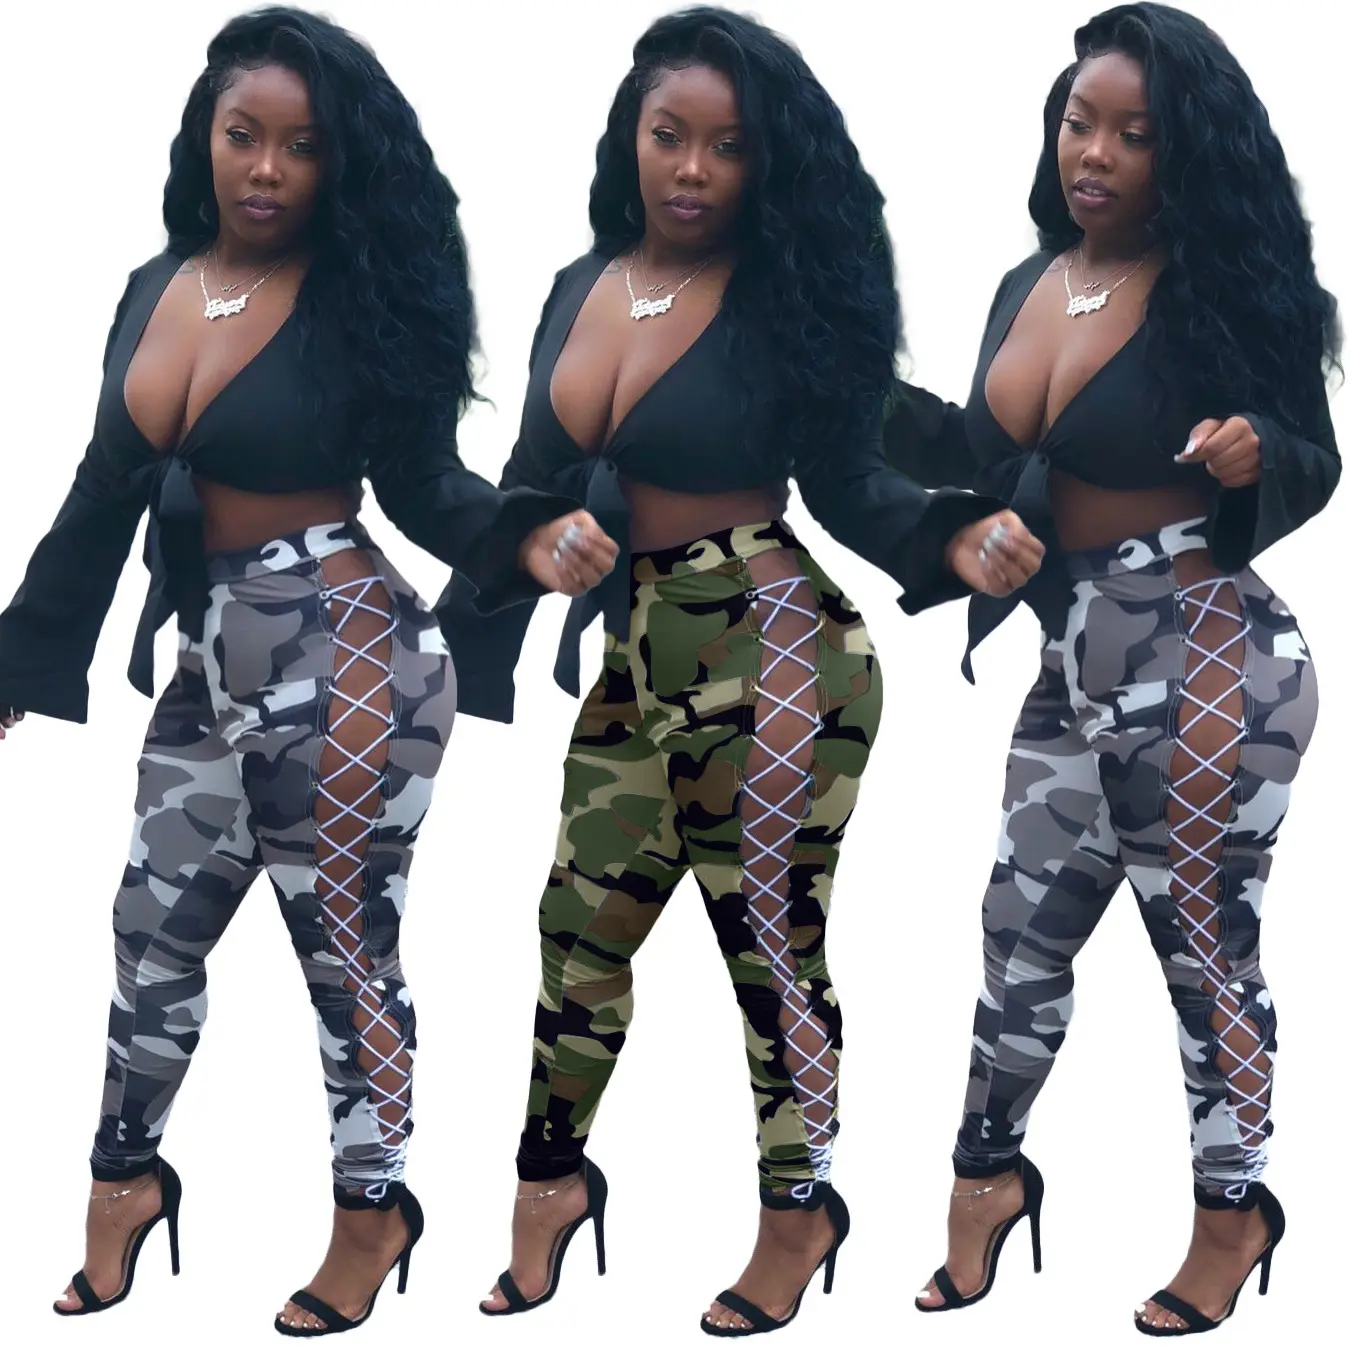 Yp Trendy Vrouwen Fashion Sexy Hollow Out Broek Lace Up Camouflage Toevallige Lange Broek Hoge Taille Broek